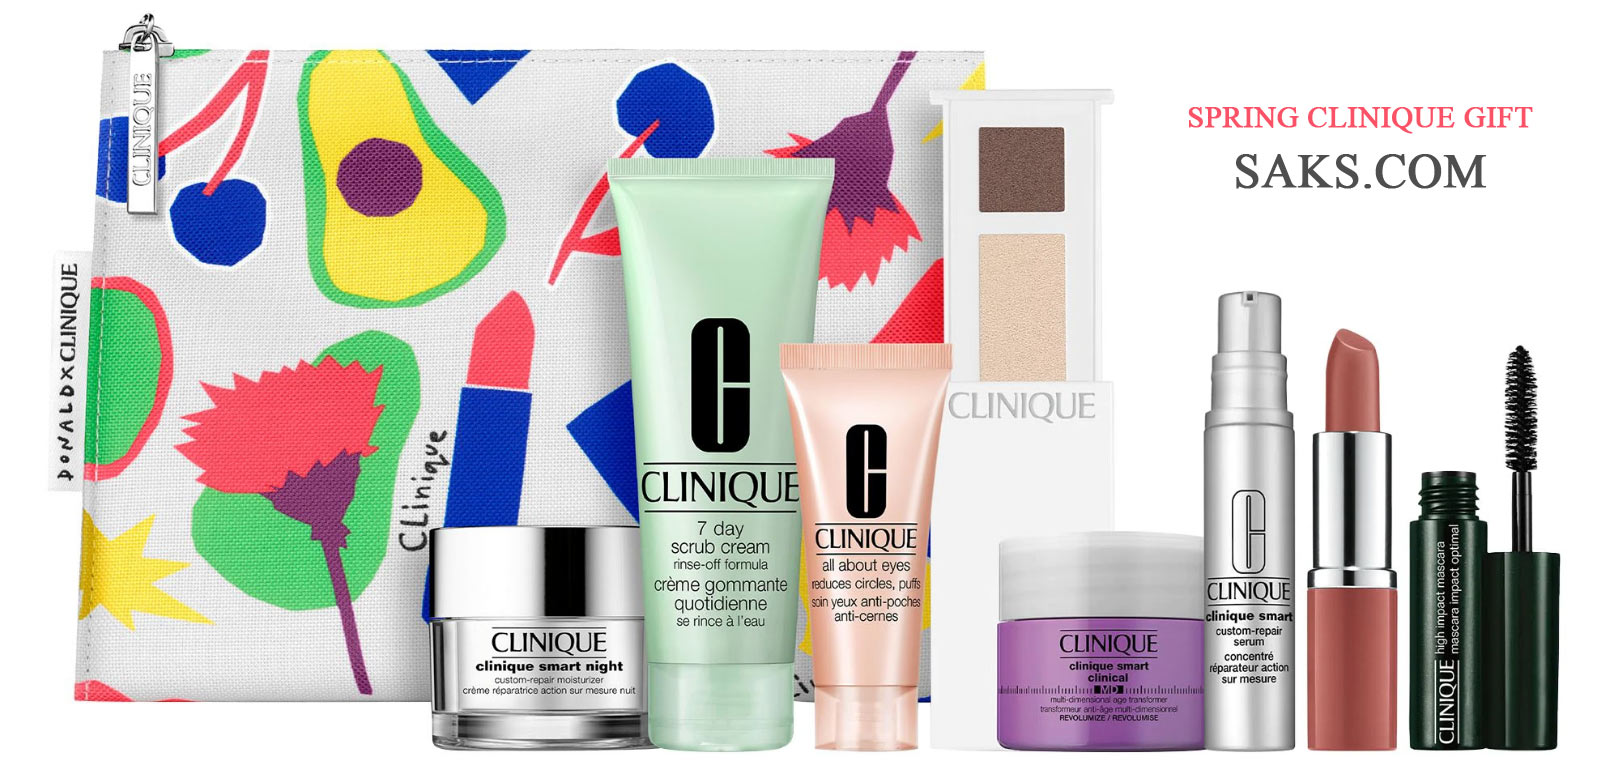 Other stores with Clinique bonus in United States